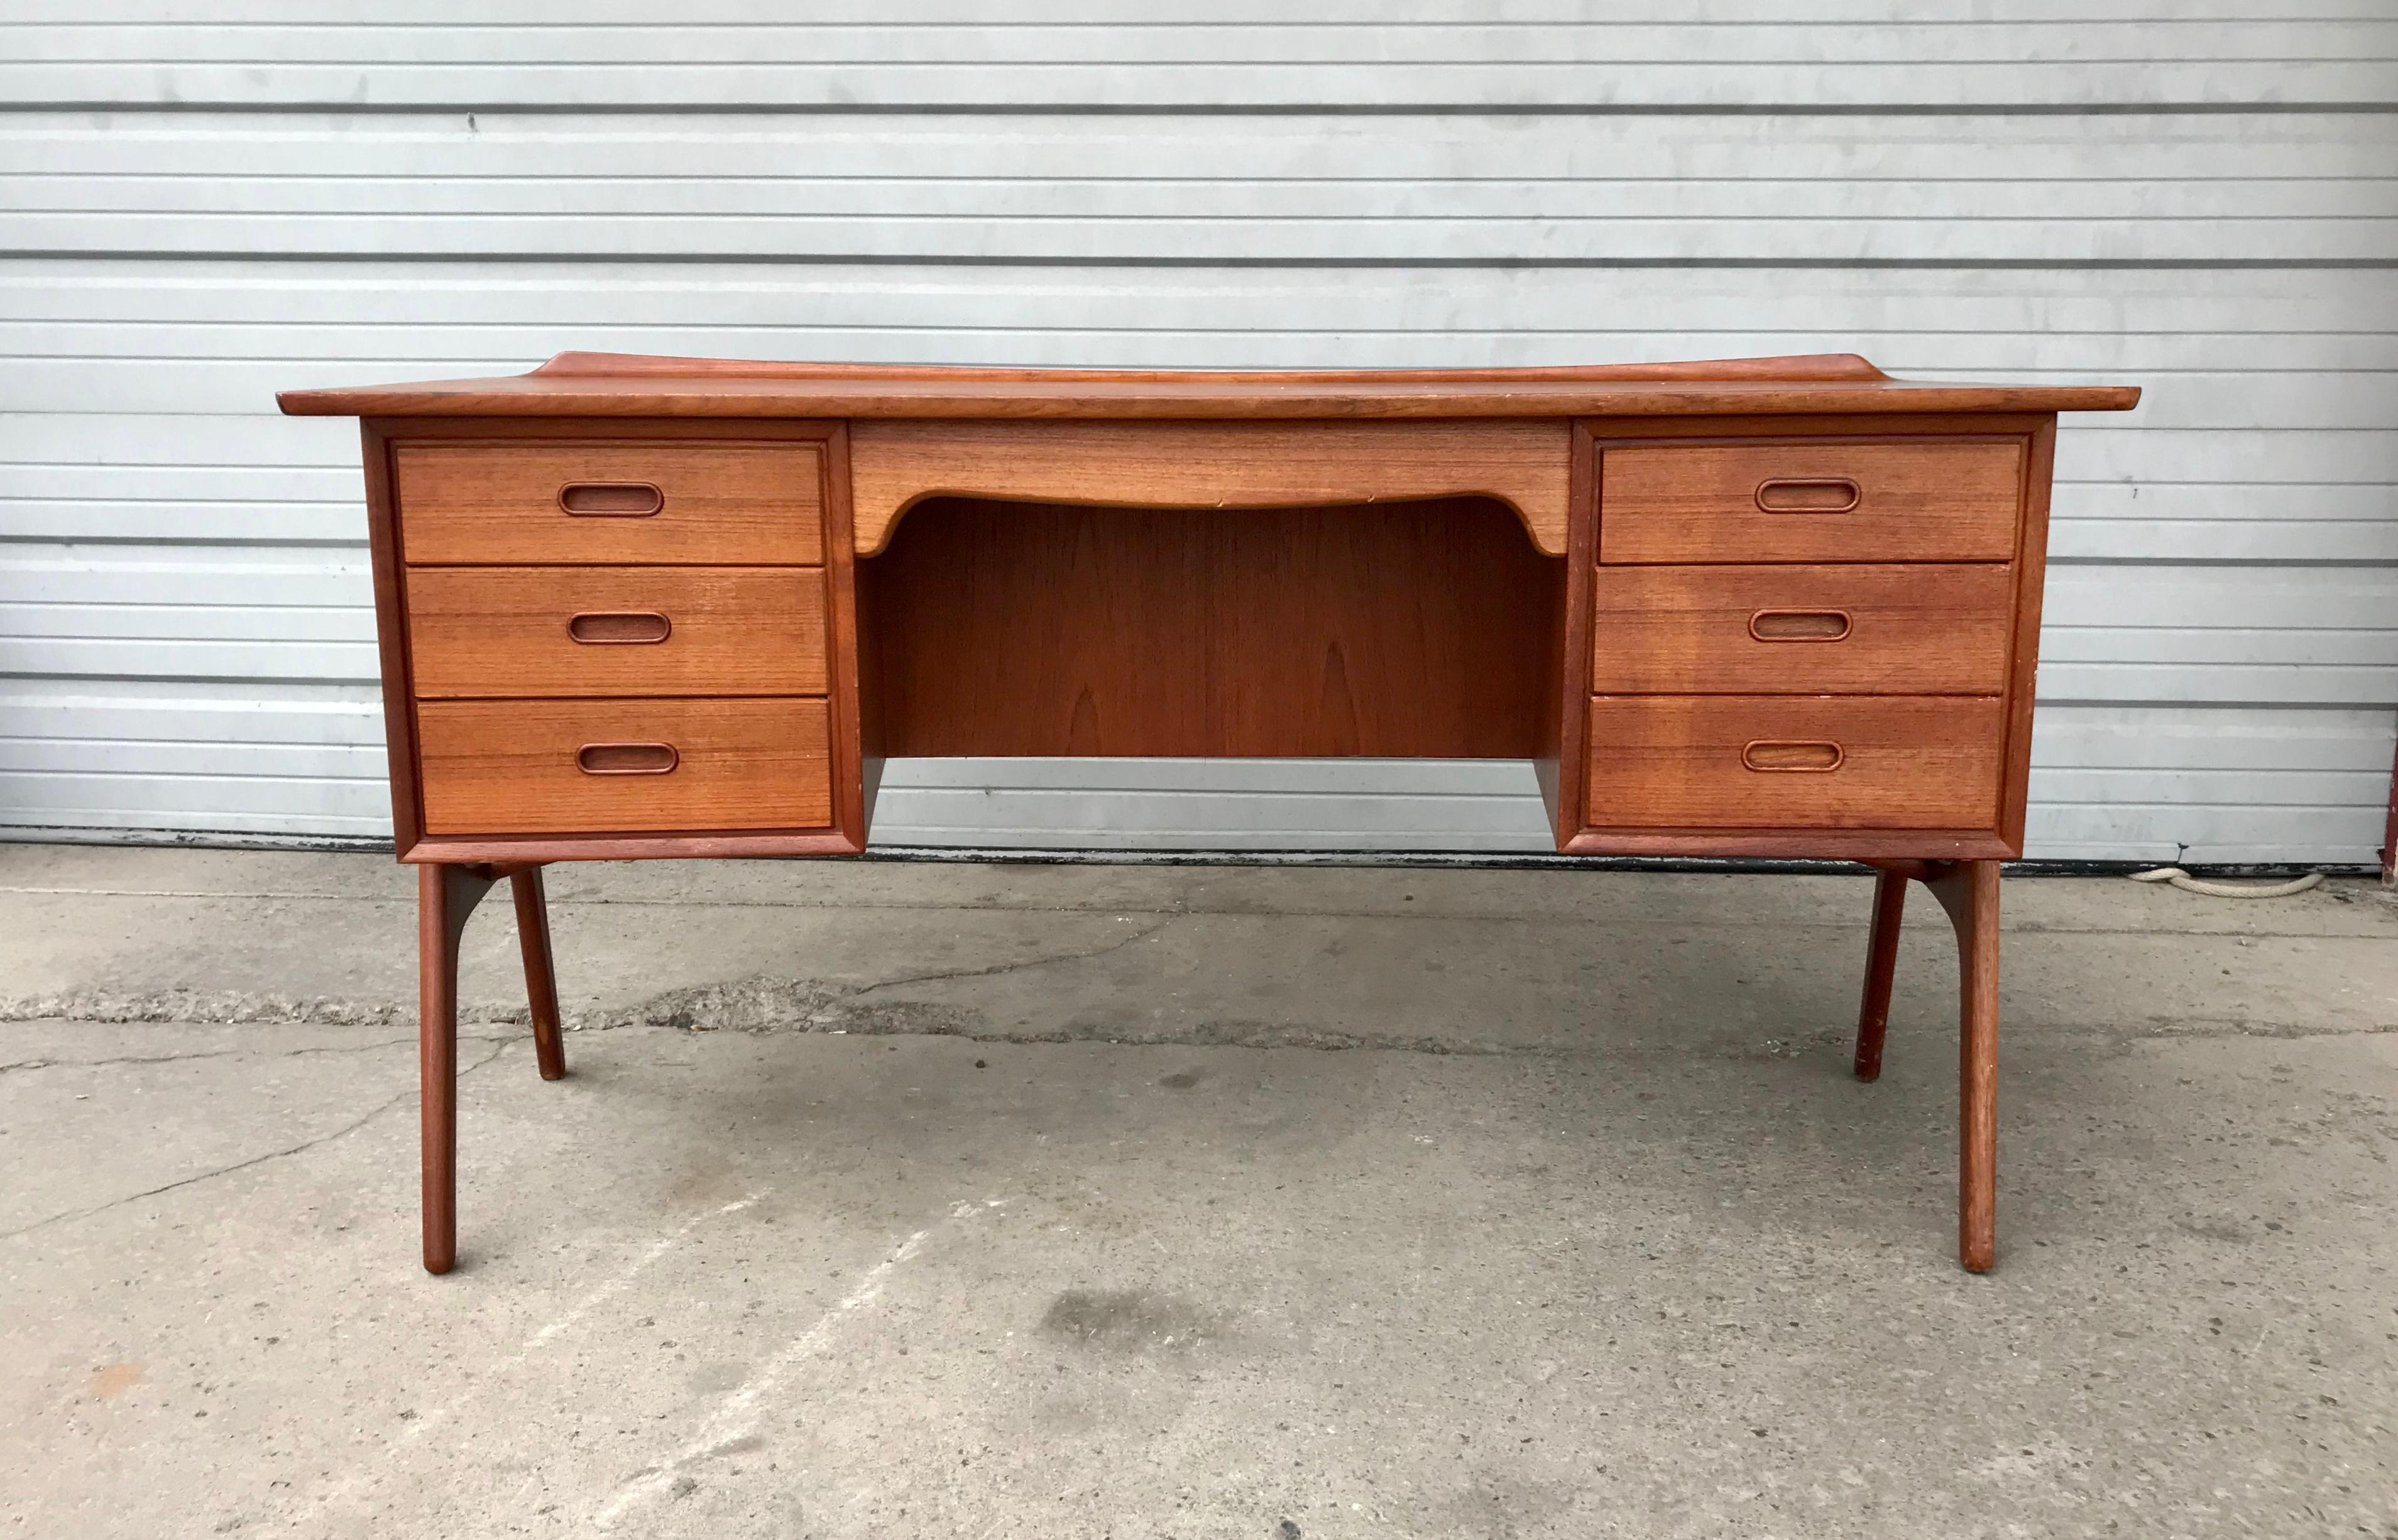 Classic Scandinavian teak desk, model SH 180, by Svend Madsen for Sigurd Hansen.

Svend Aage Madsen designed this teak desk, model SH 180, for Sigurd Hansen Møbelfabrik in the early 1960s. The curved case sits on a sculpted frame with contrasting